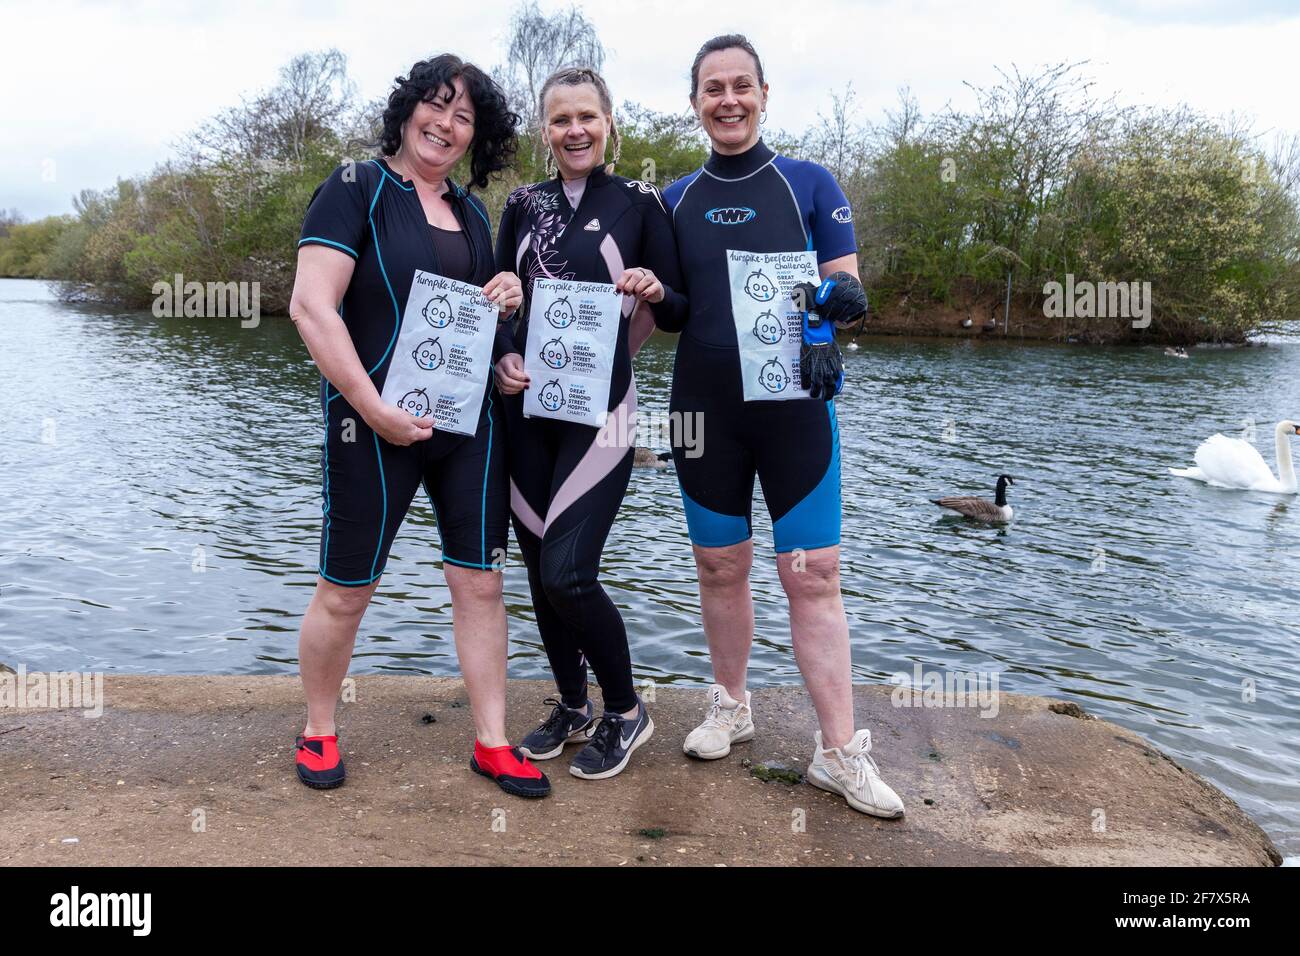 Northampton, UK. 10th April 2021. Shirley Payne Mann with support from Denise Anderson and Penny Etheridge (left to right) are wild swimming in freezing water of a lake for as long as they possible can raising money for Great Ormond Street Hospital. Credit: Keith J Smith./Alamy Live News Stock Photo